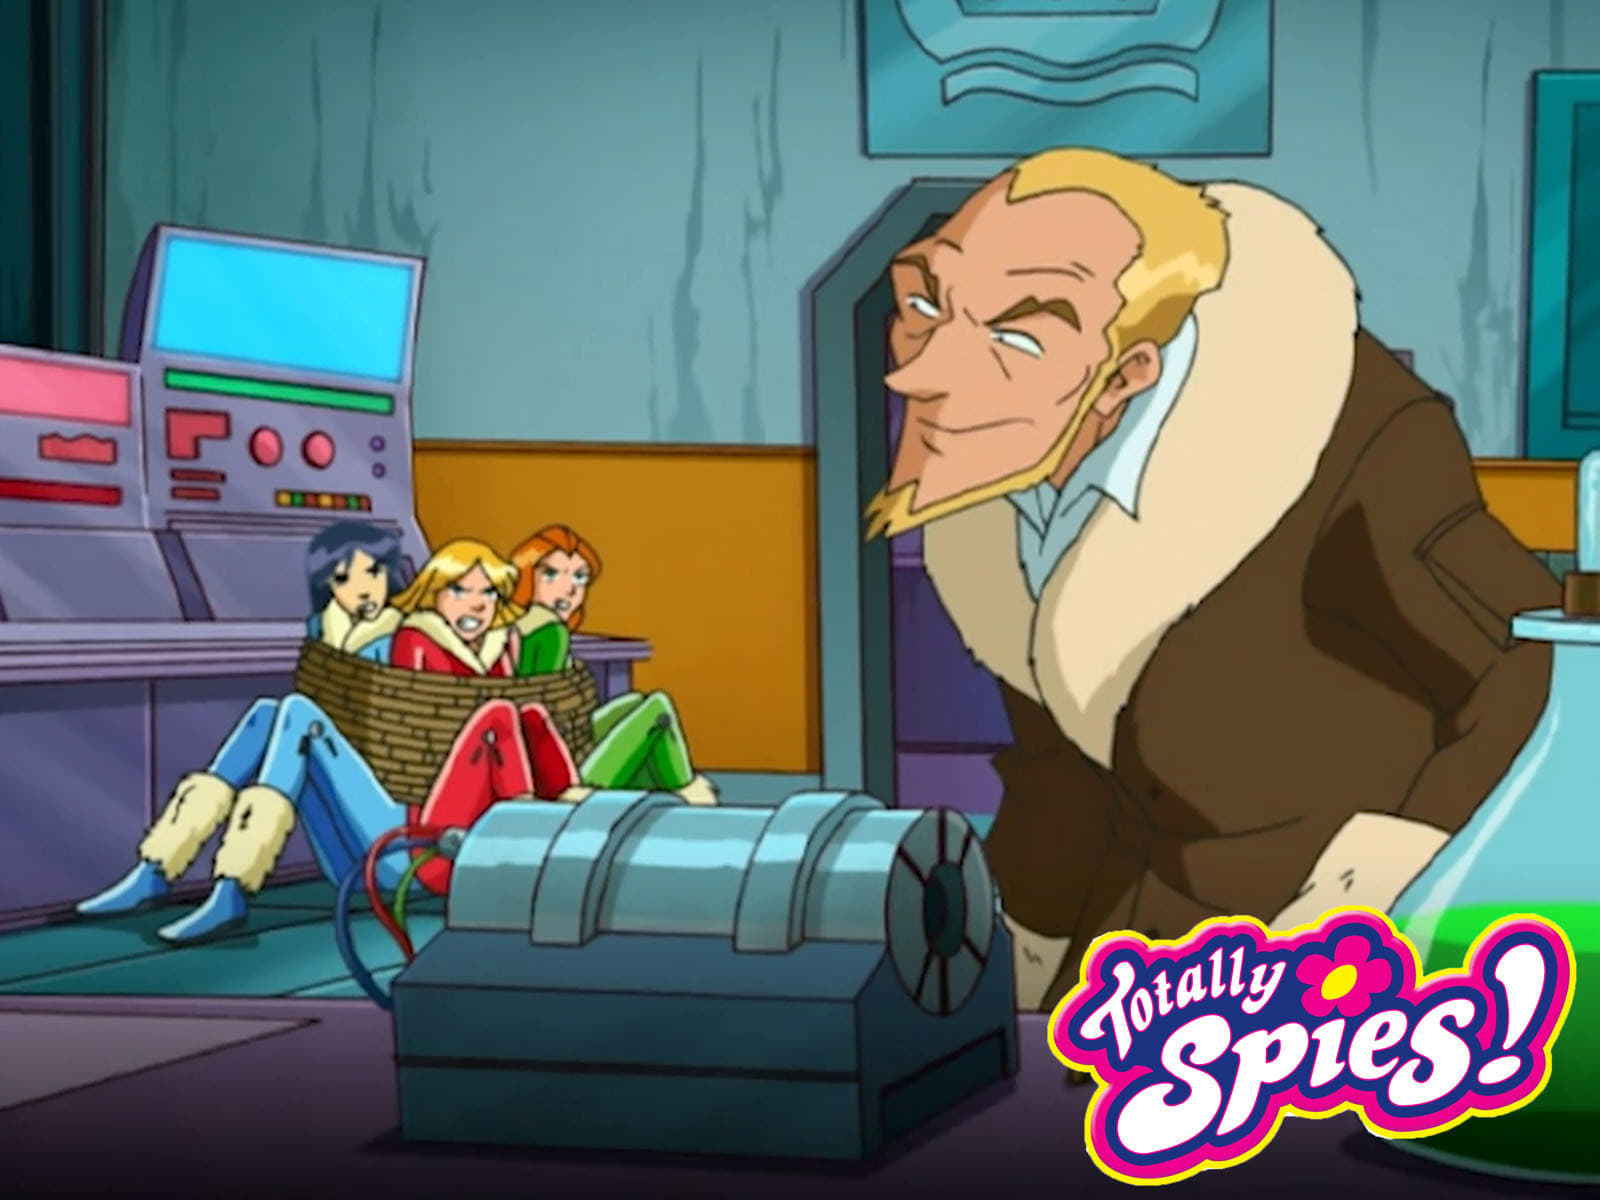 Totally spies tied up